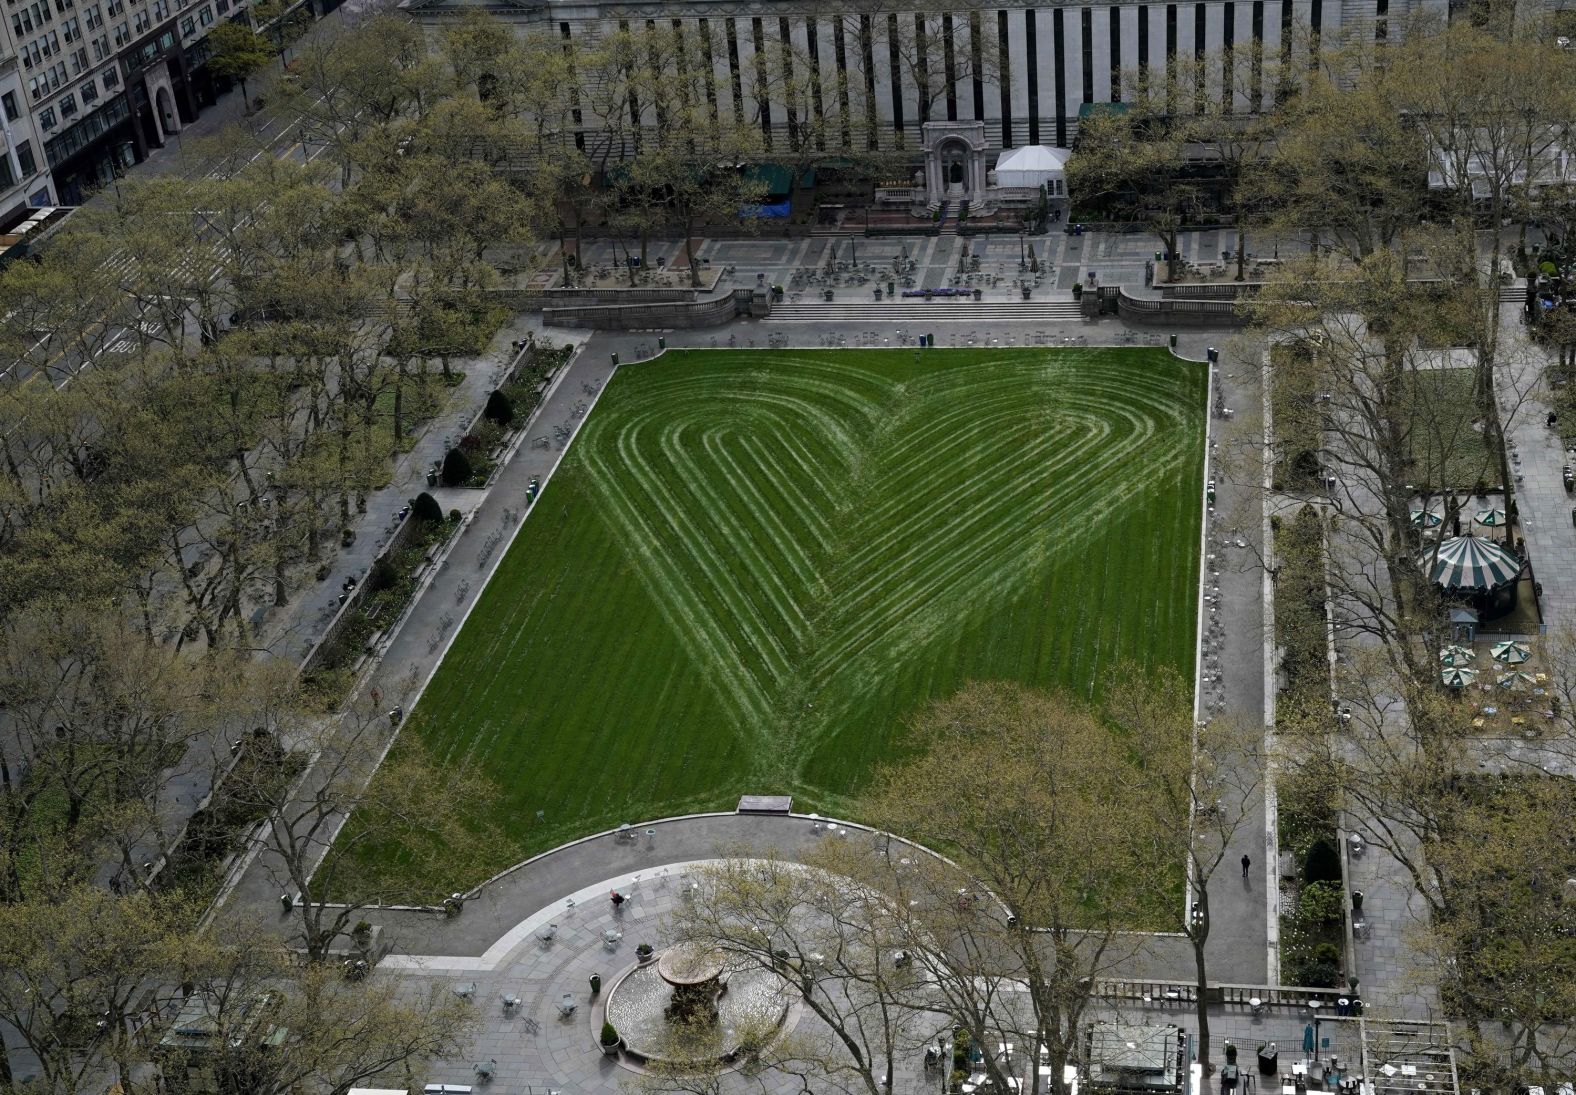 In a tribute to health-care workers, first responders and essential workers, the Bryant Park Corporation created a heart on its newly seeded lawn in New York on April 22.